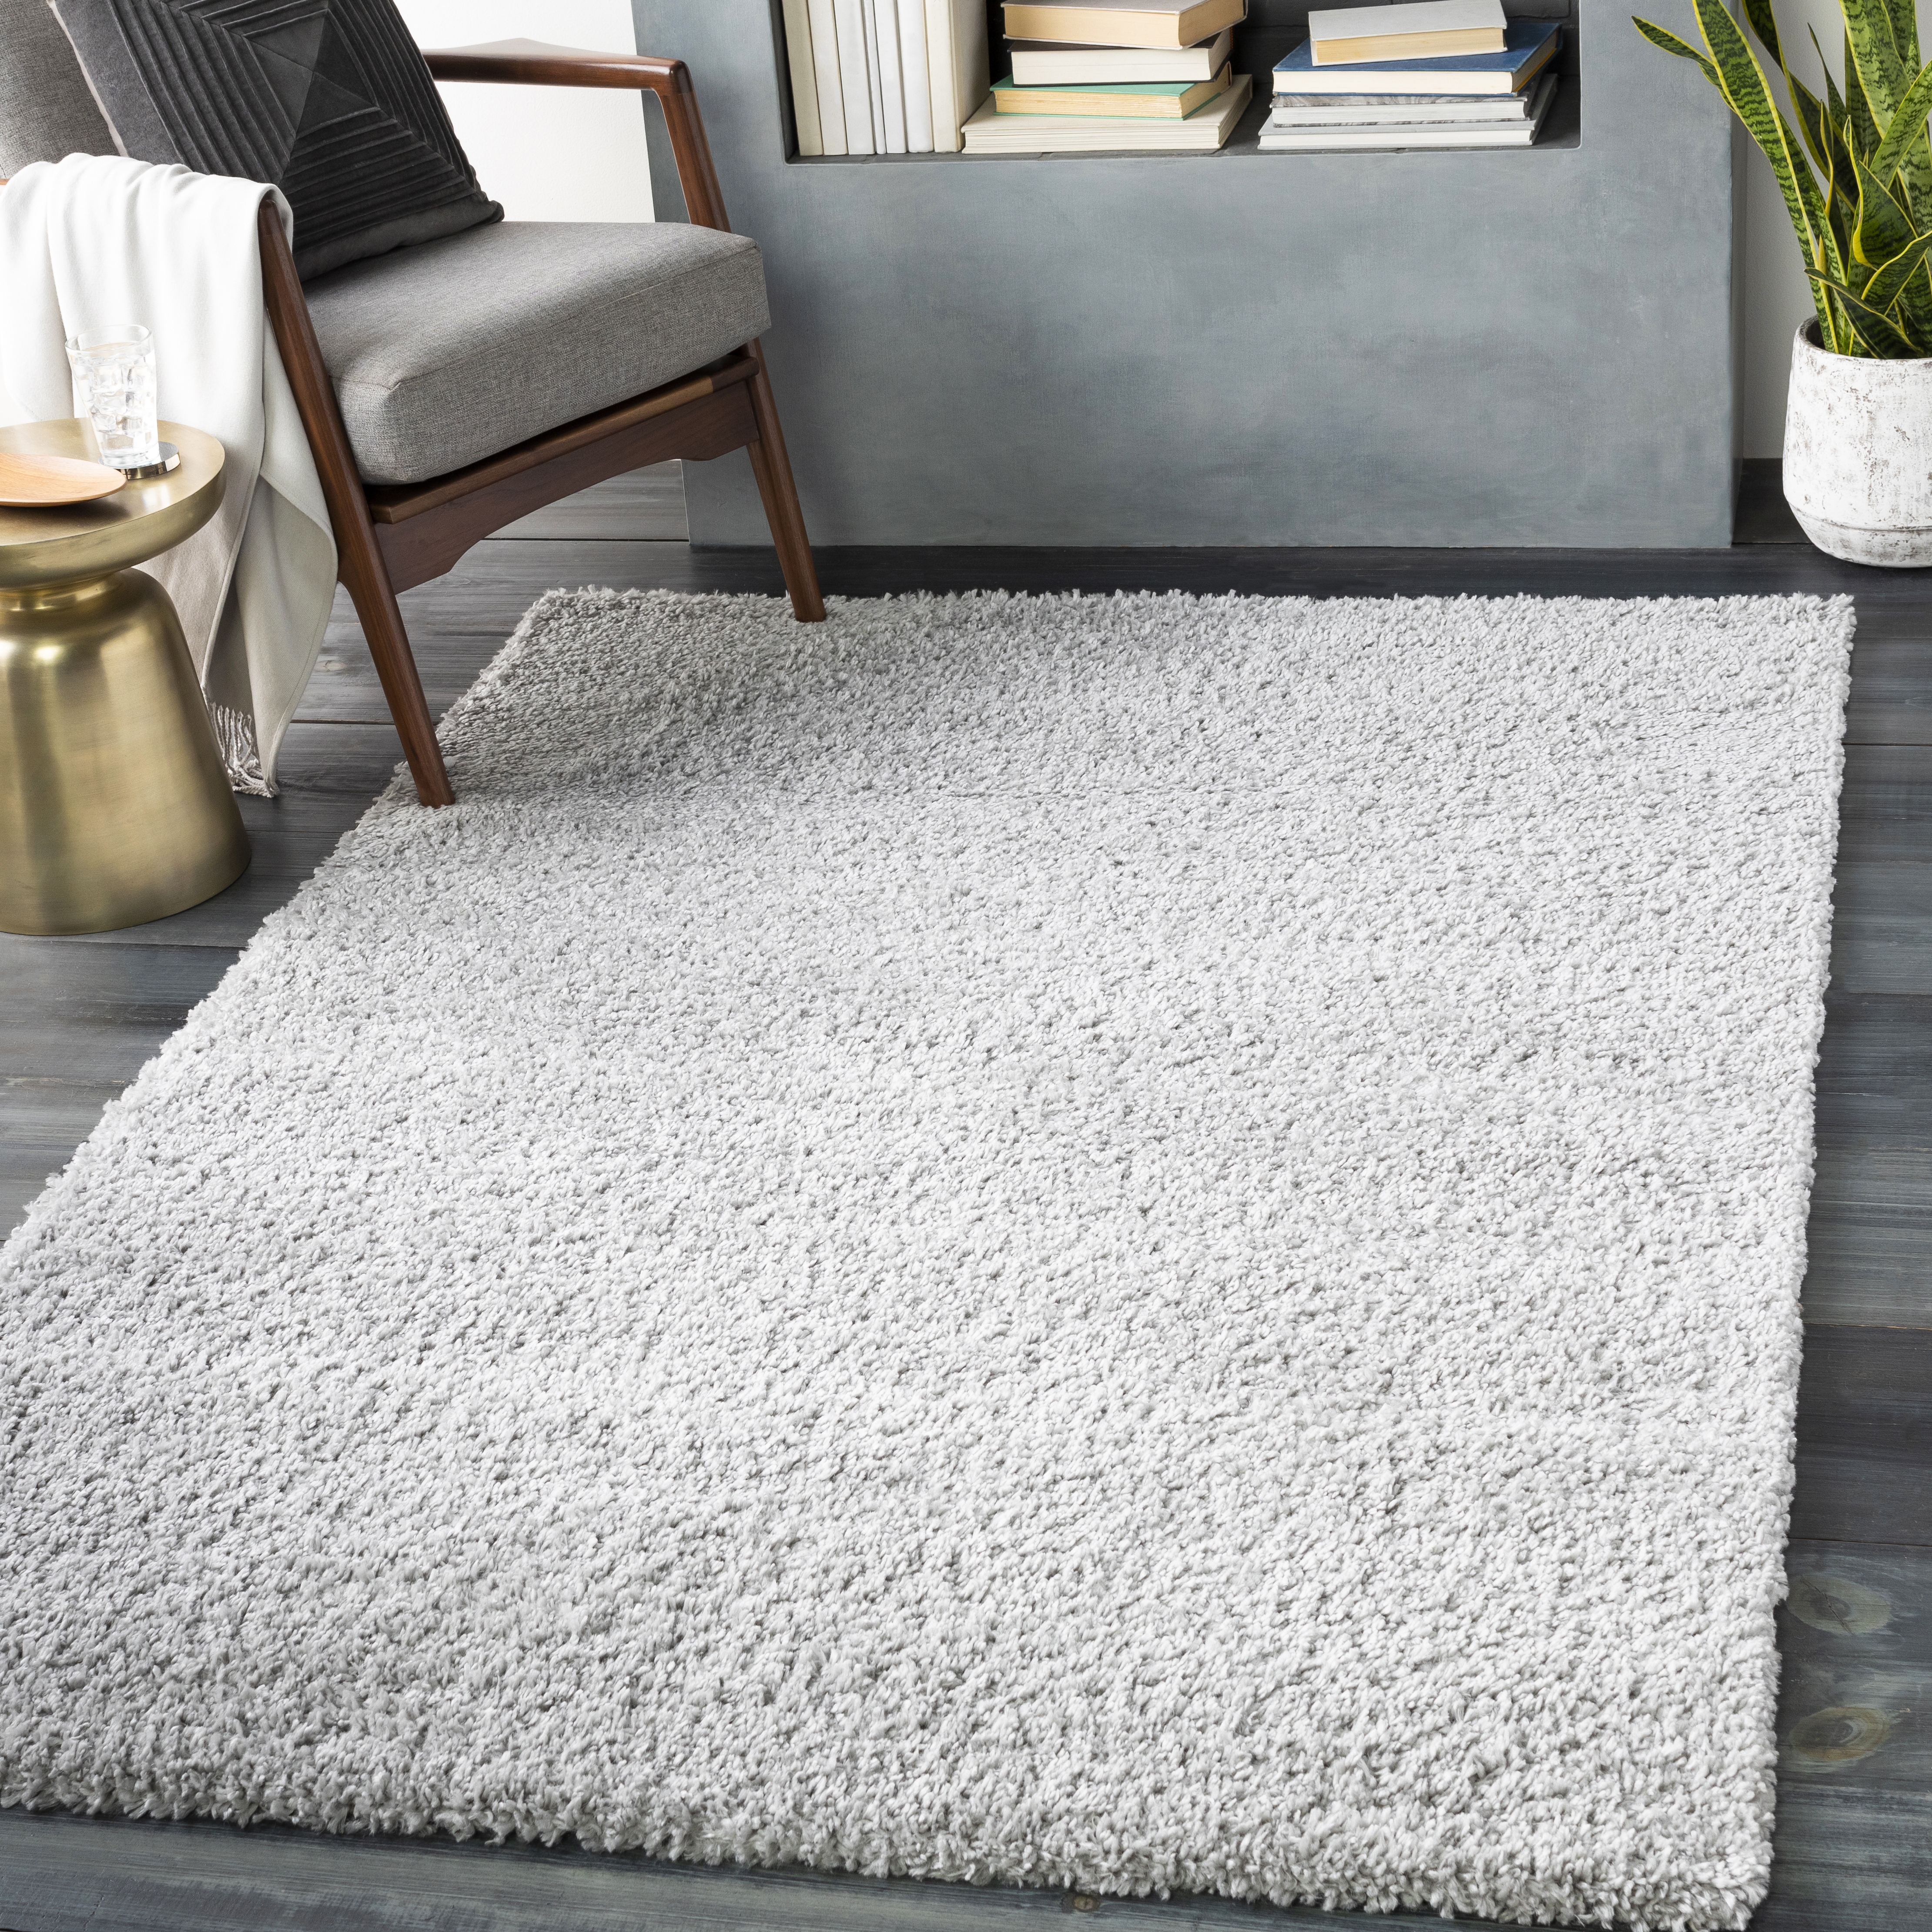 Deluxe Shag Rug, 9' x 12' - Image 1